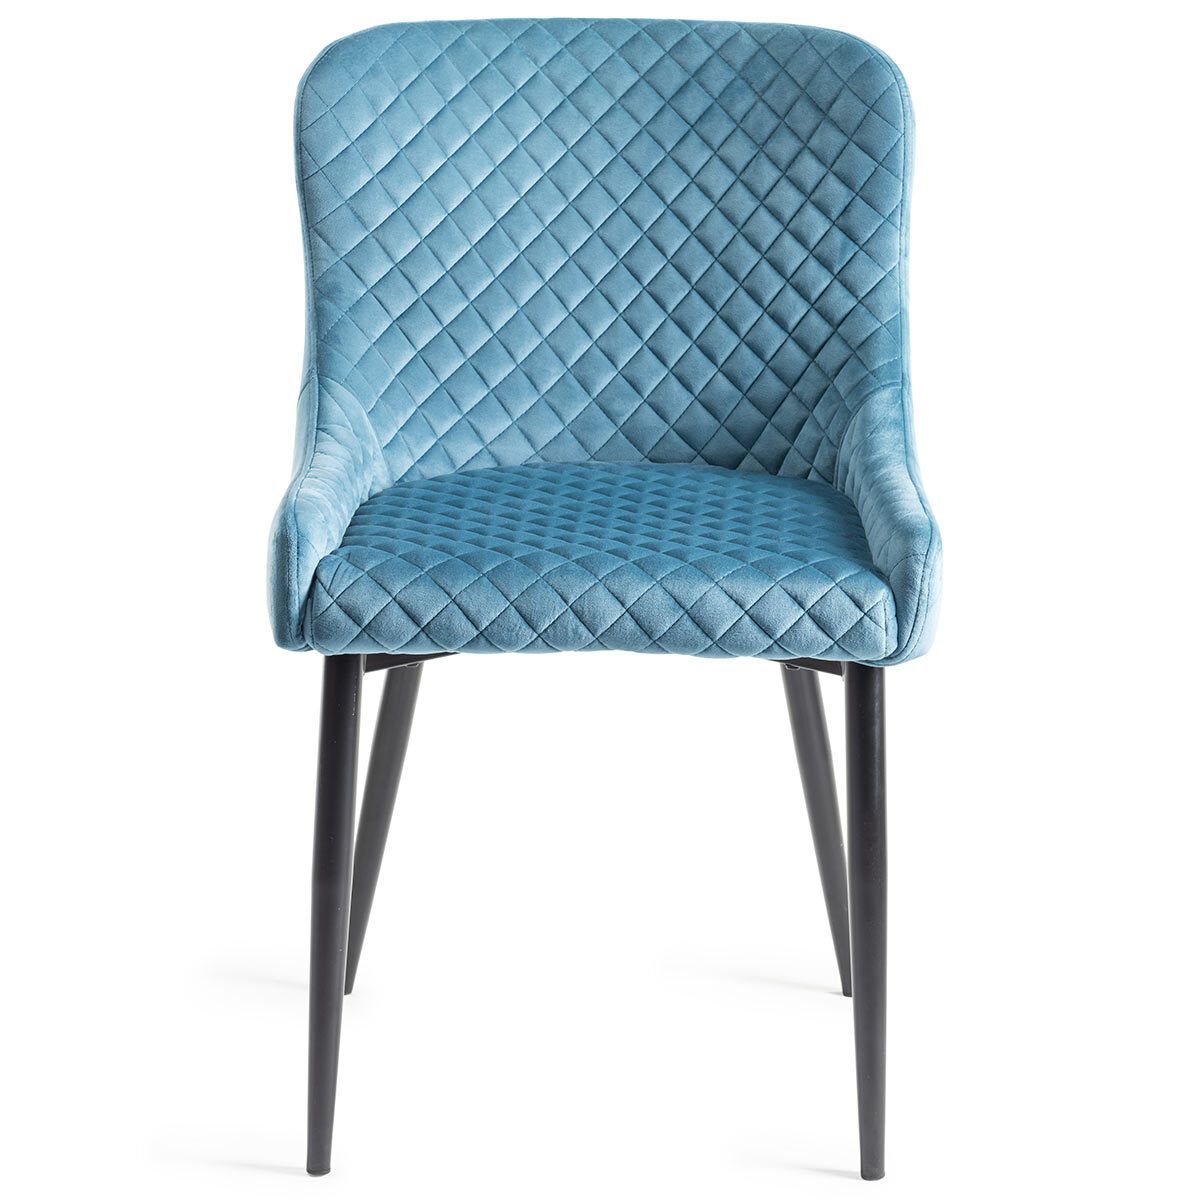 Grey Velvet Diamond Stiched Chair. 2 Pack